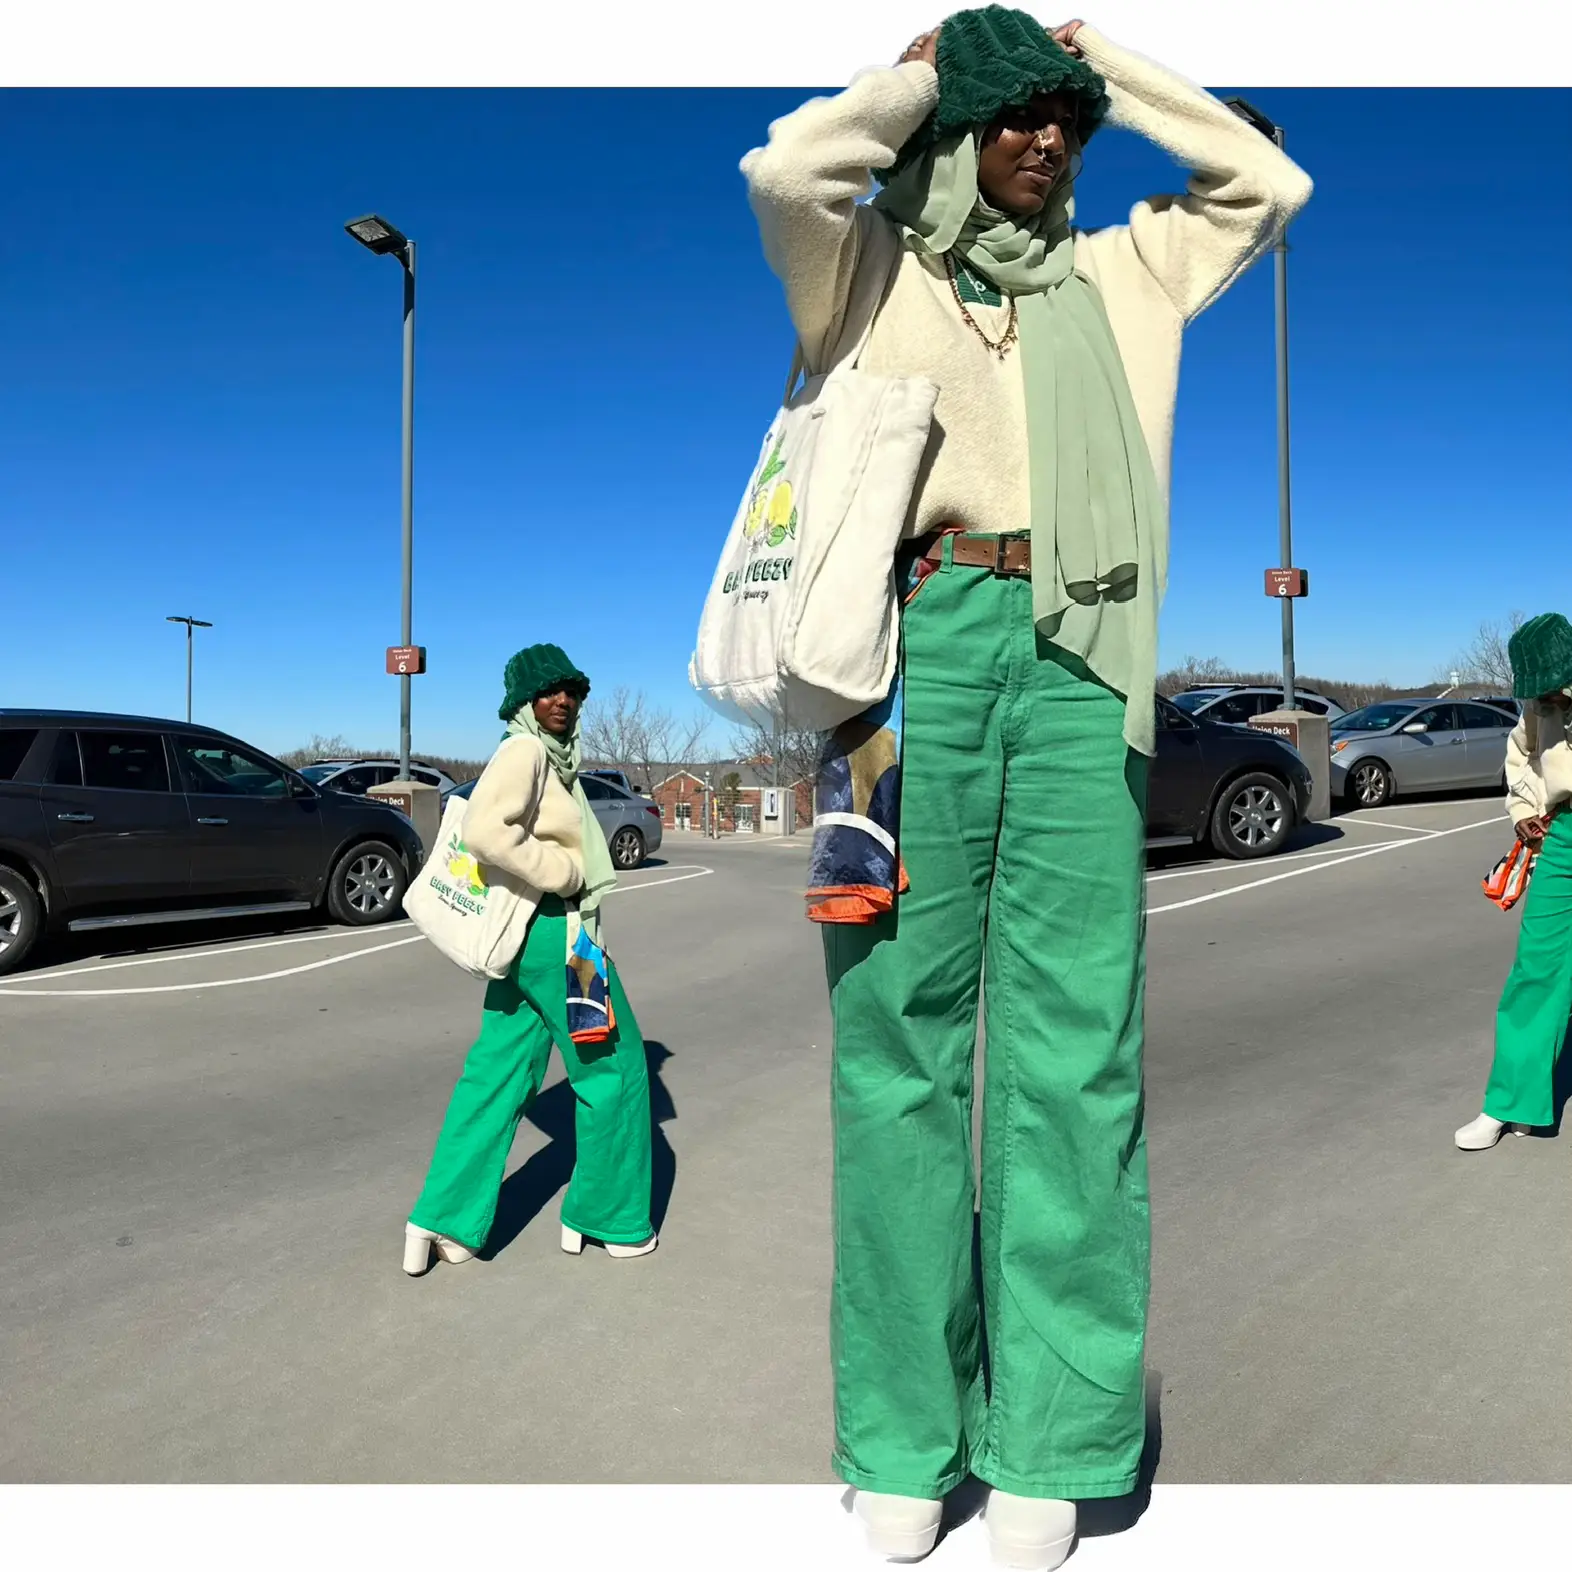 Bright green outfit 💚, Gallery posted by Nura